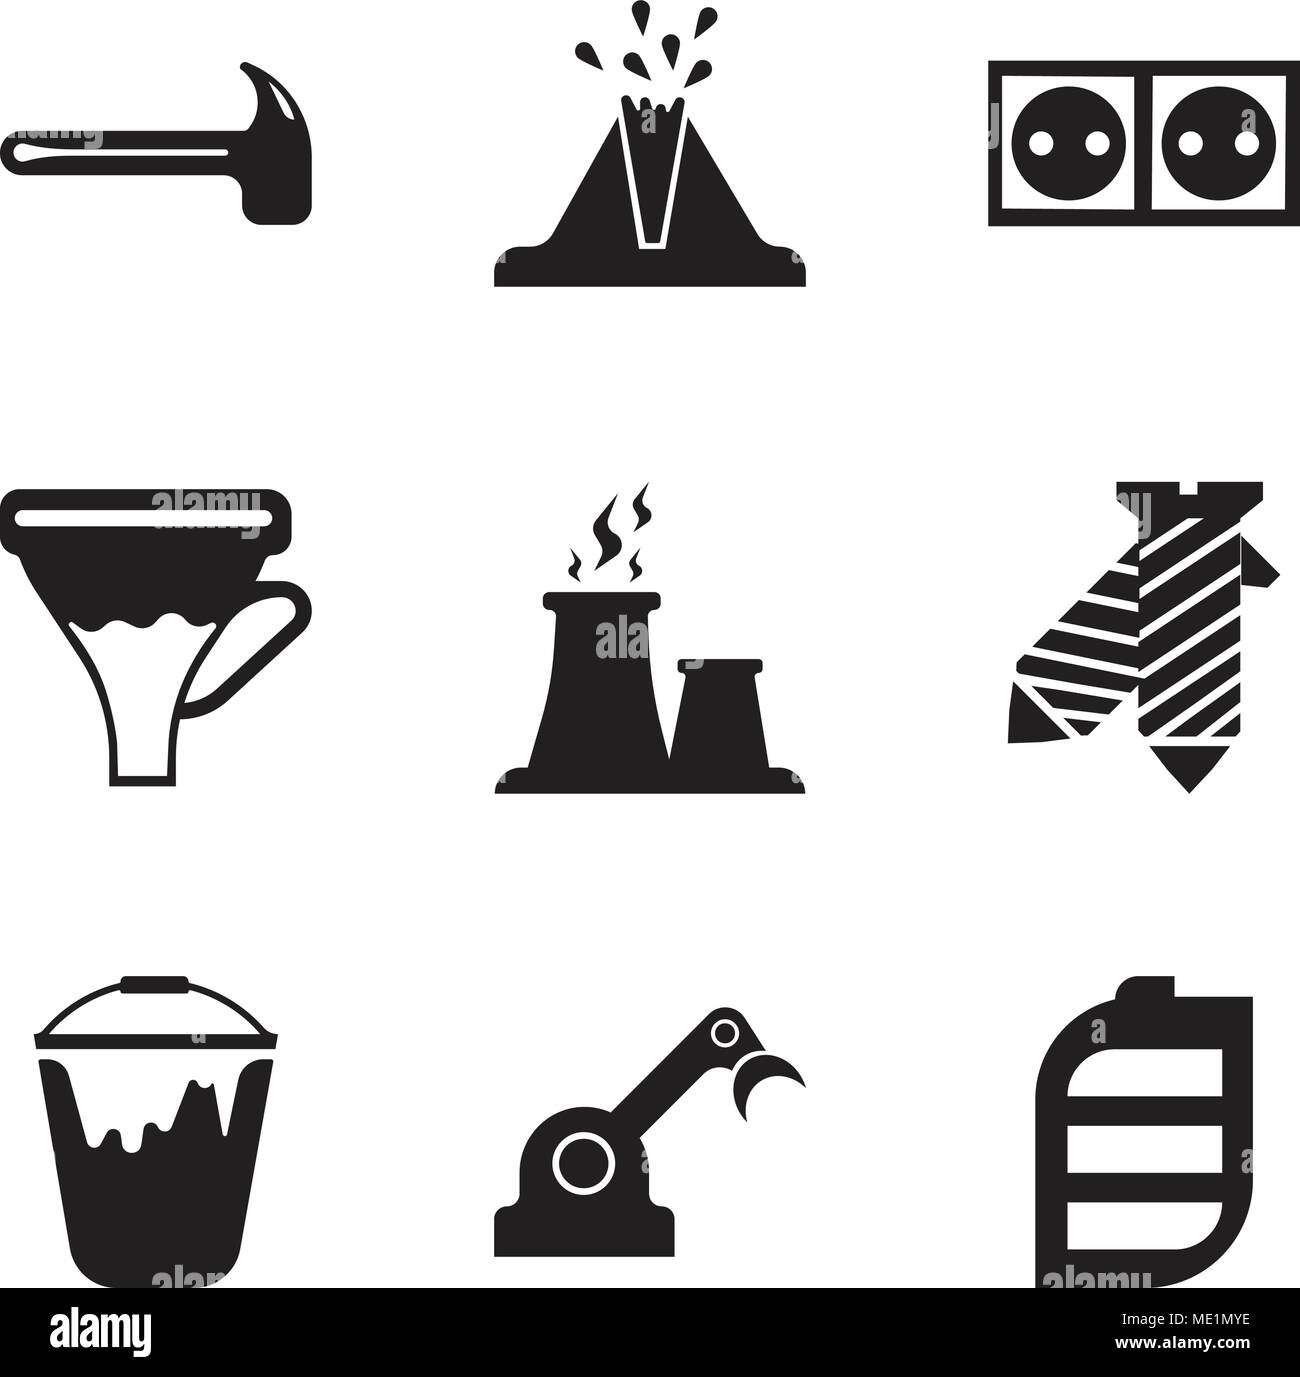 Set Of 9 simple editable icons such as battery, jenny, colour bucket, tie, fabric steam, funnel, socket, volcano, hammer, can be used for mobile, web  Stock Vector